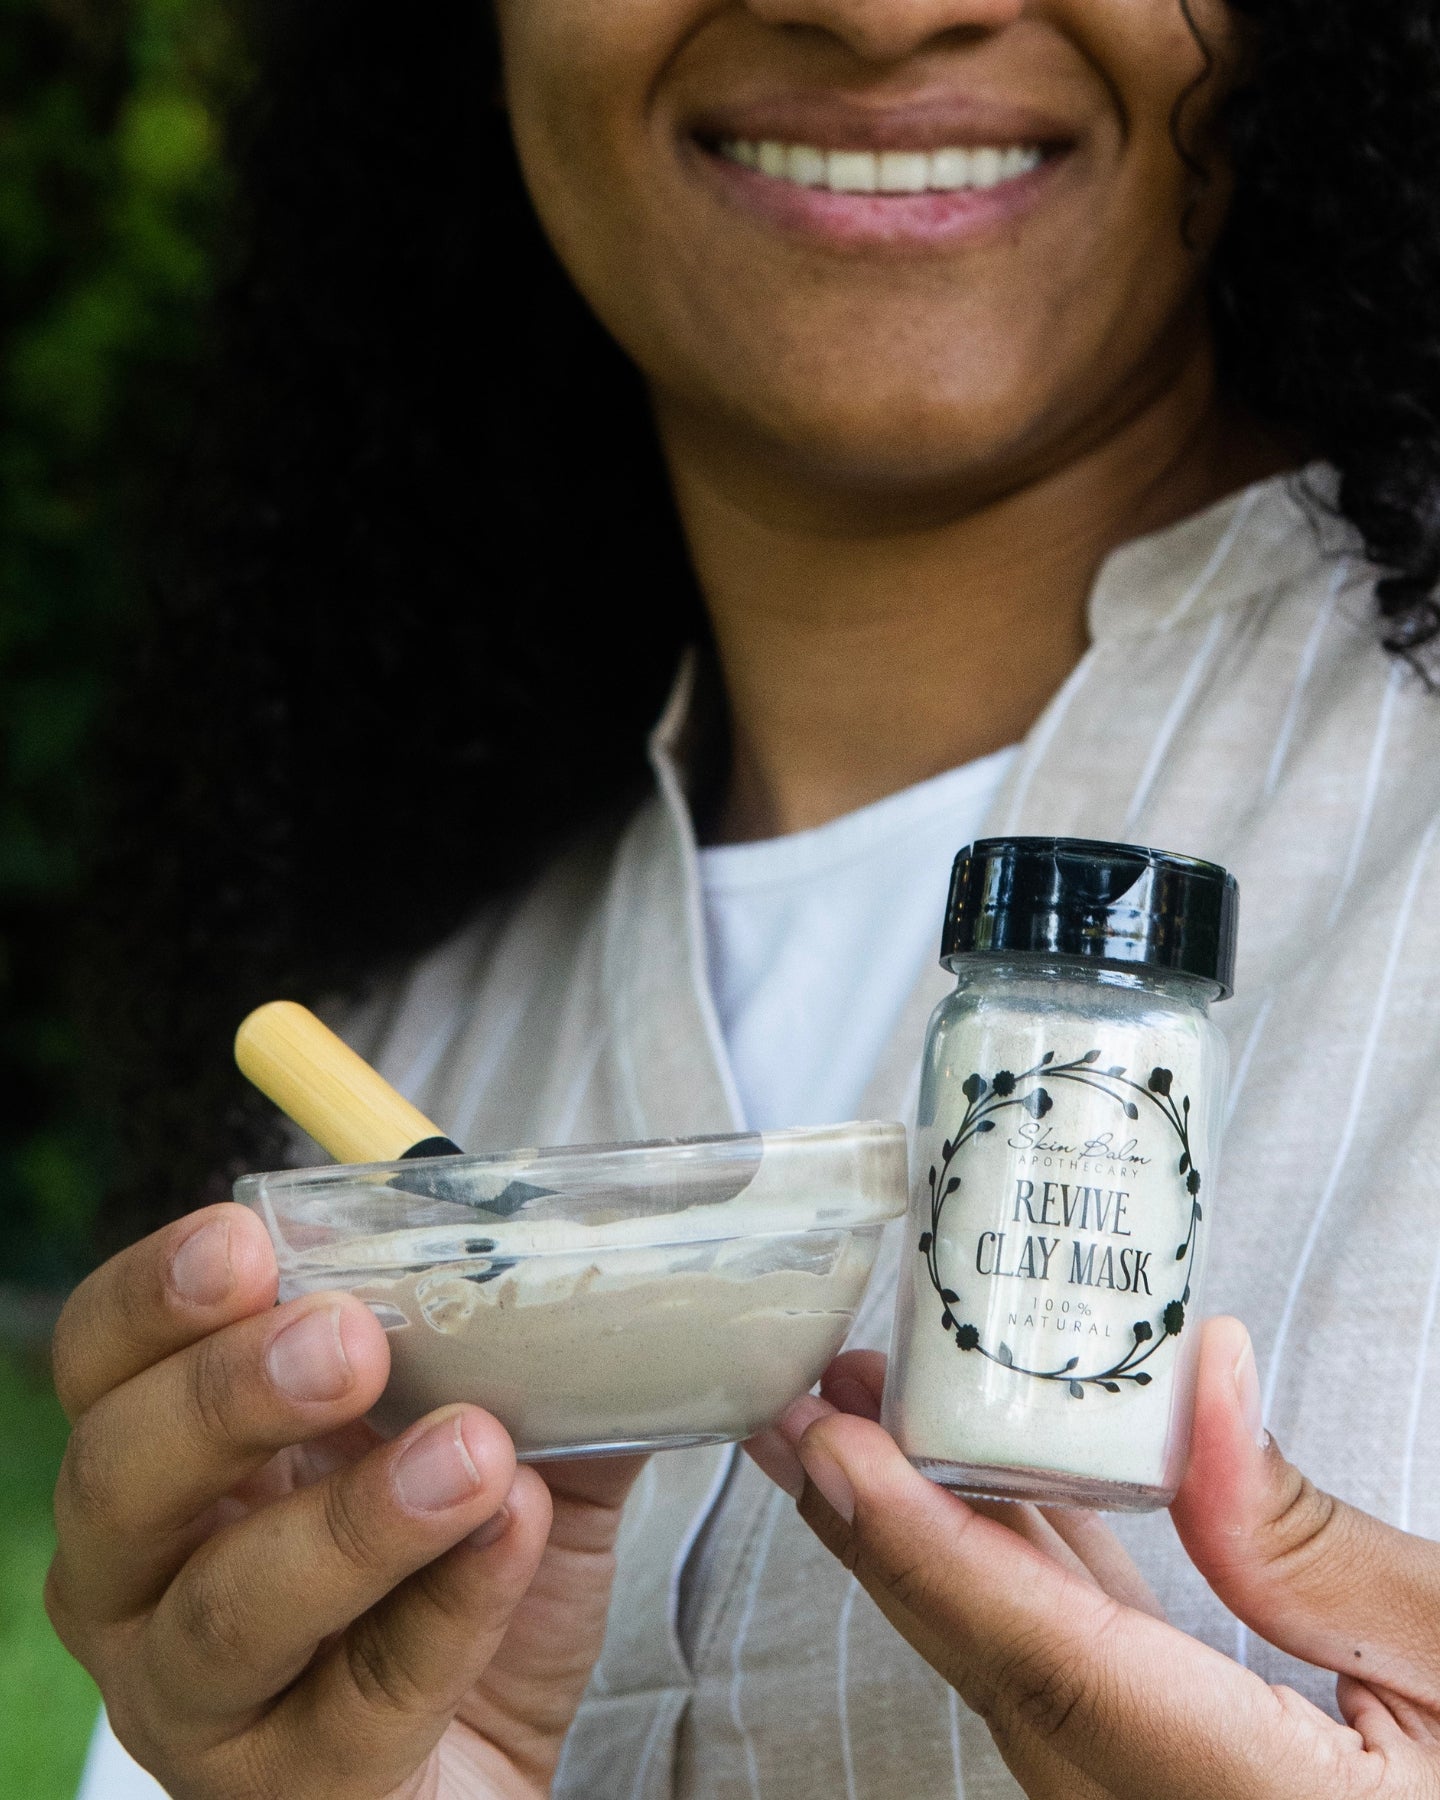 A smiling woman holds a jar of the Revive Clay Mask and a bowl of mixed product.